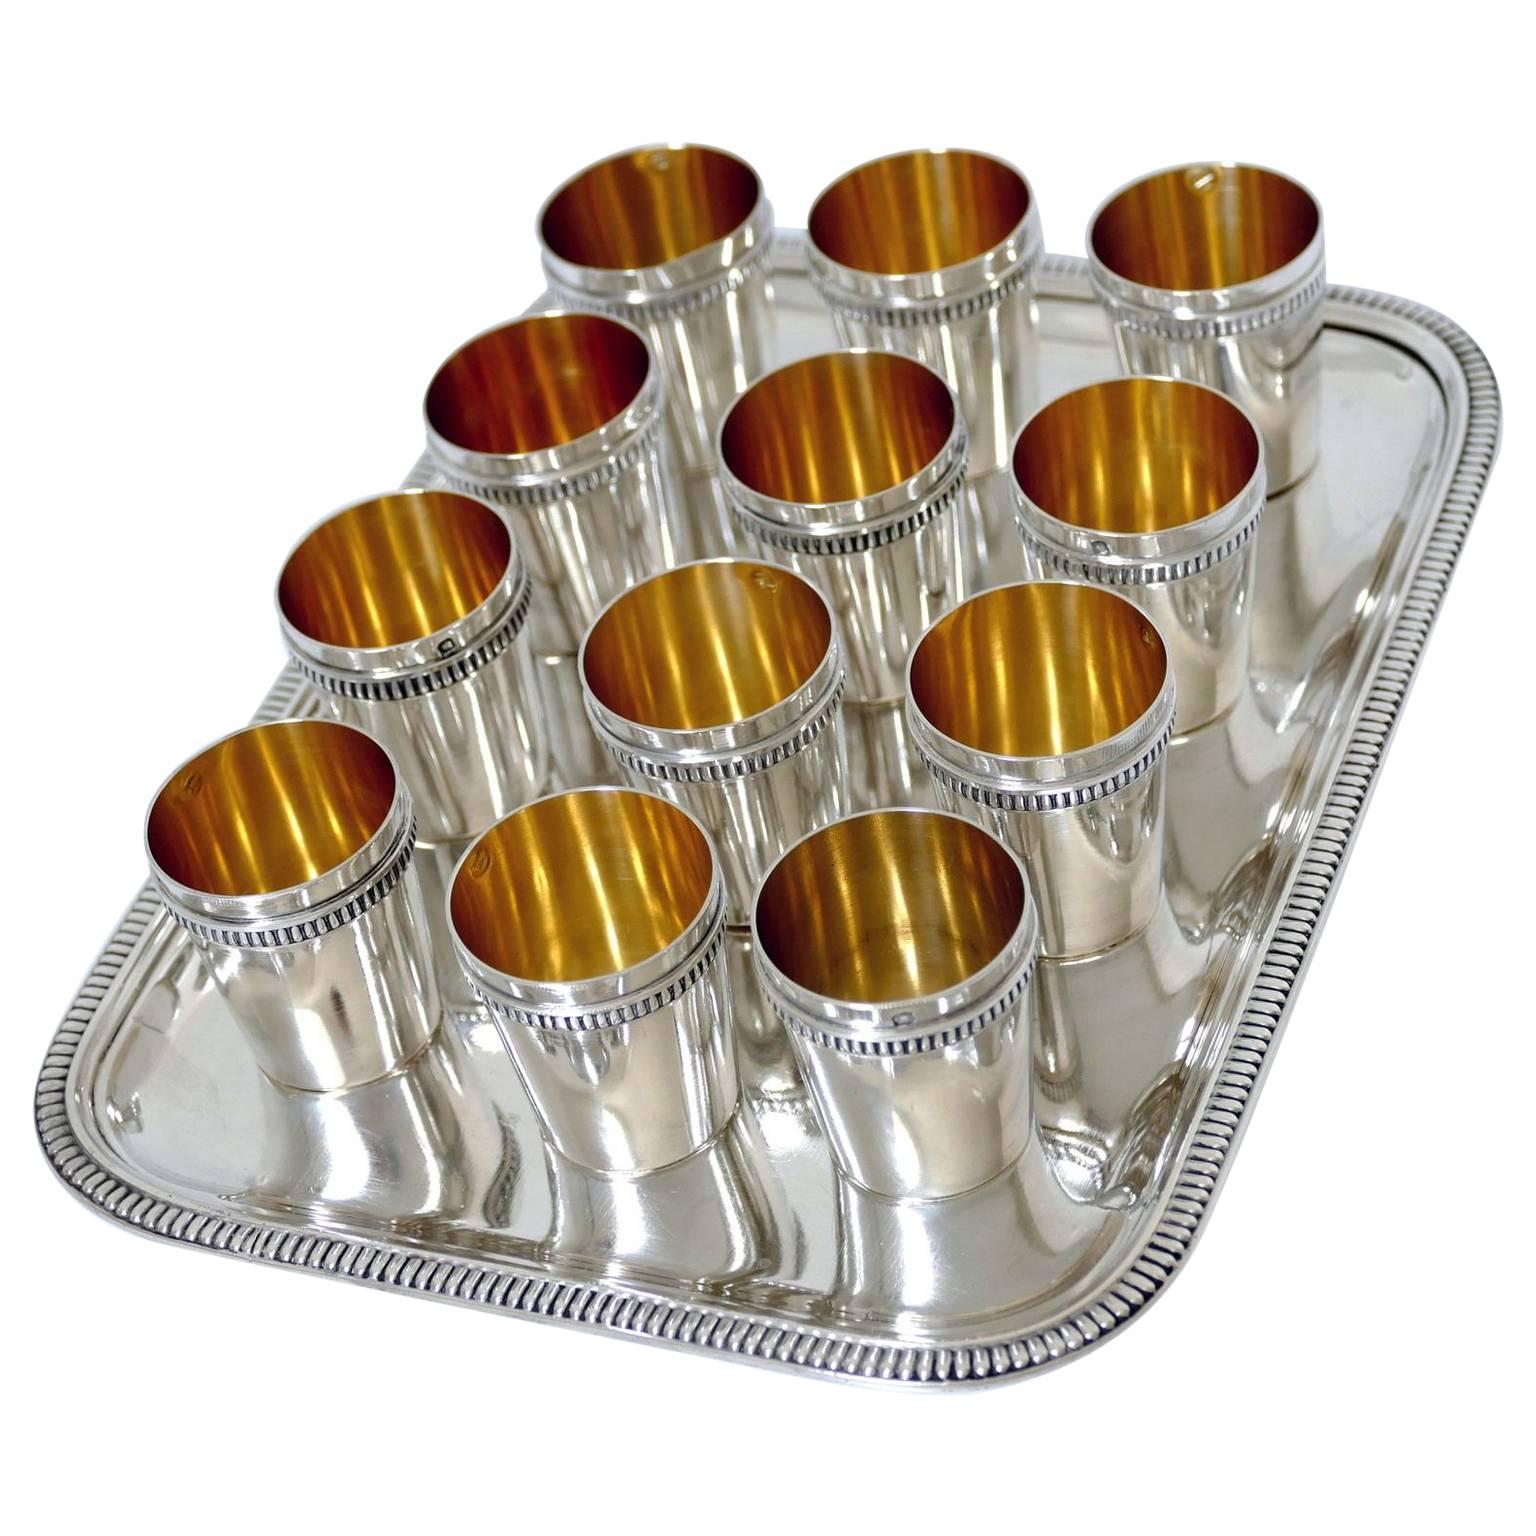 Rare French All Sterling Silver 18-Karat Gold Liquor Cups 12 Pieces with Tray For Sale